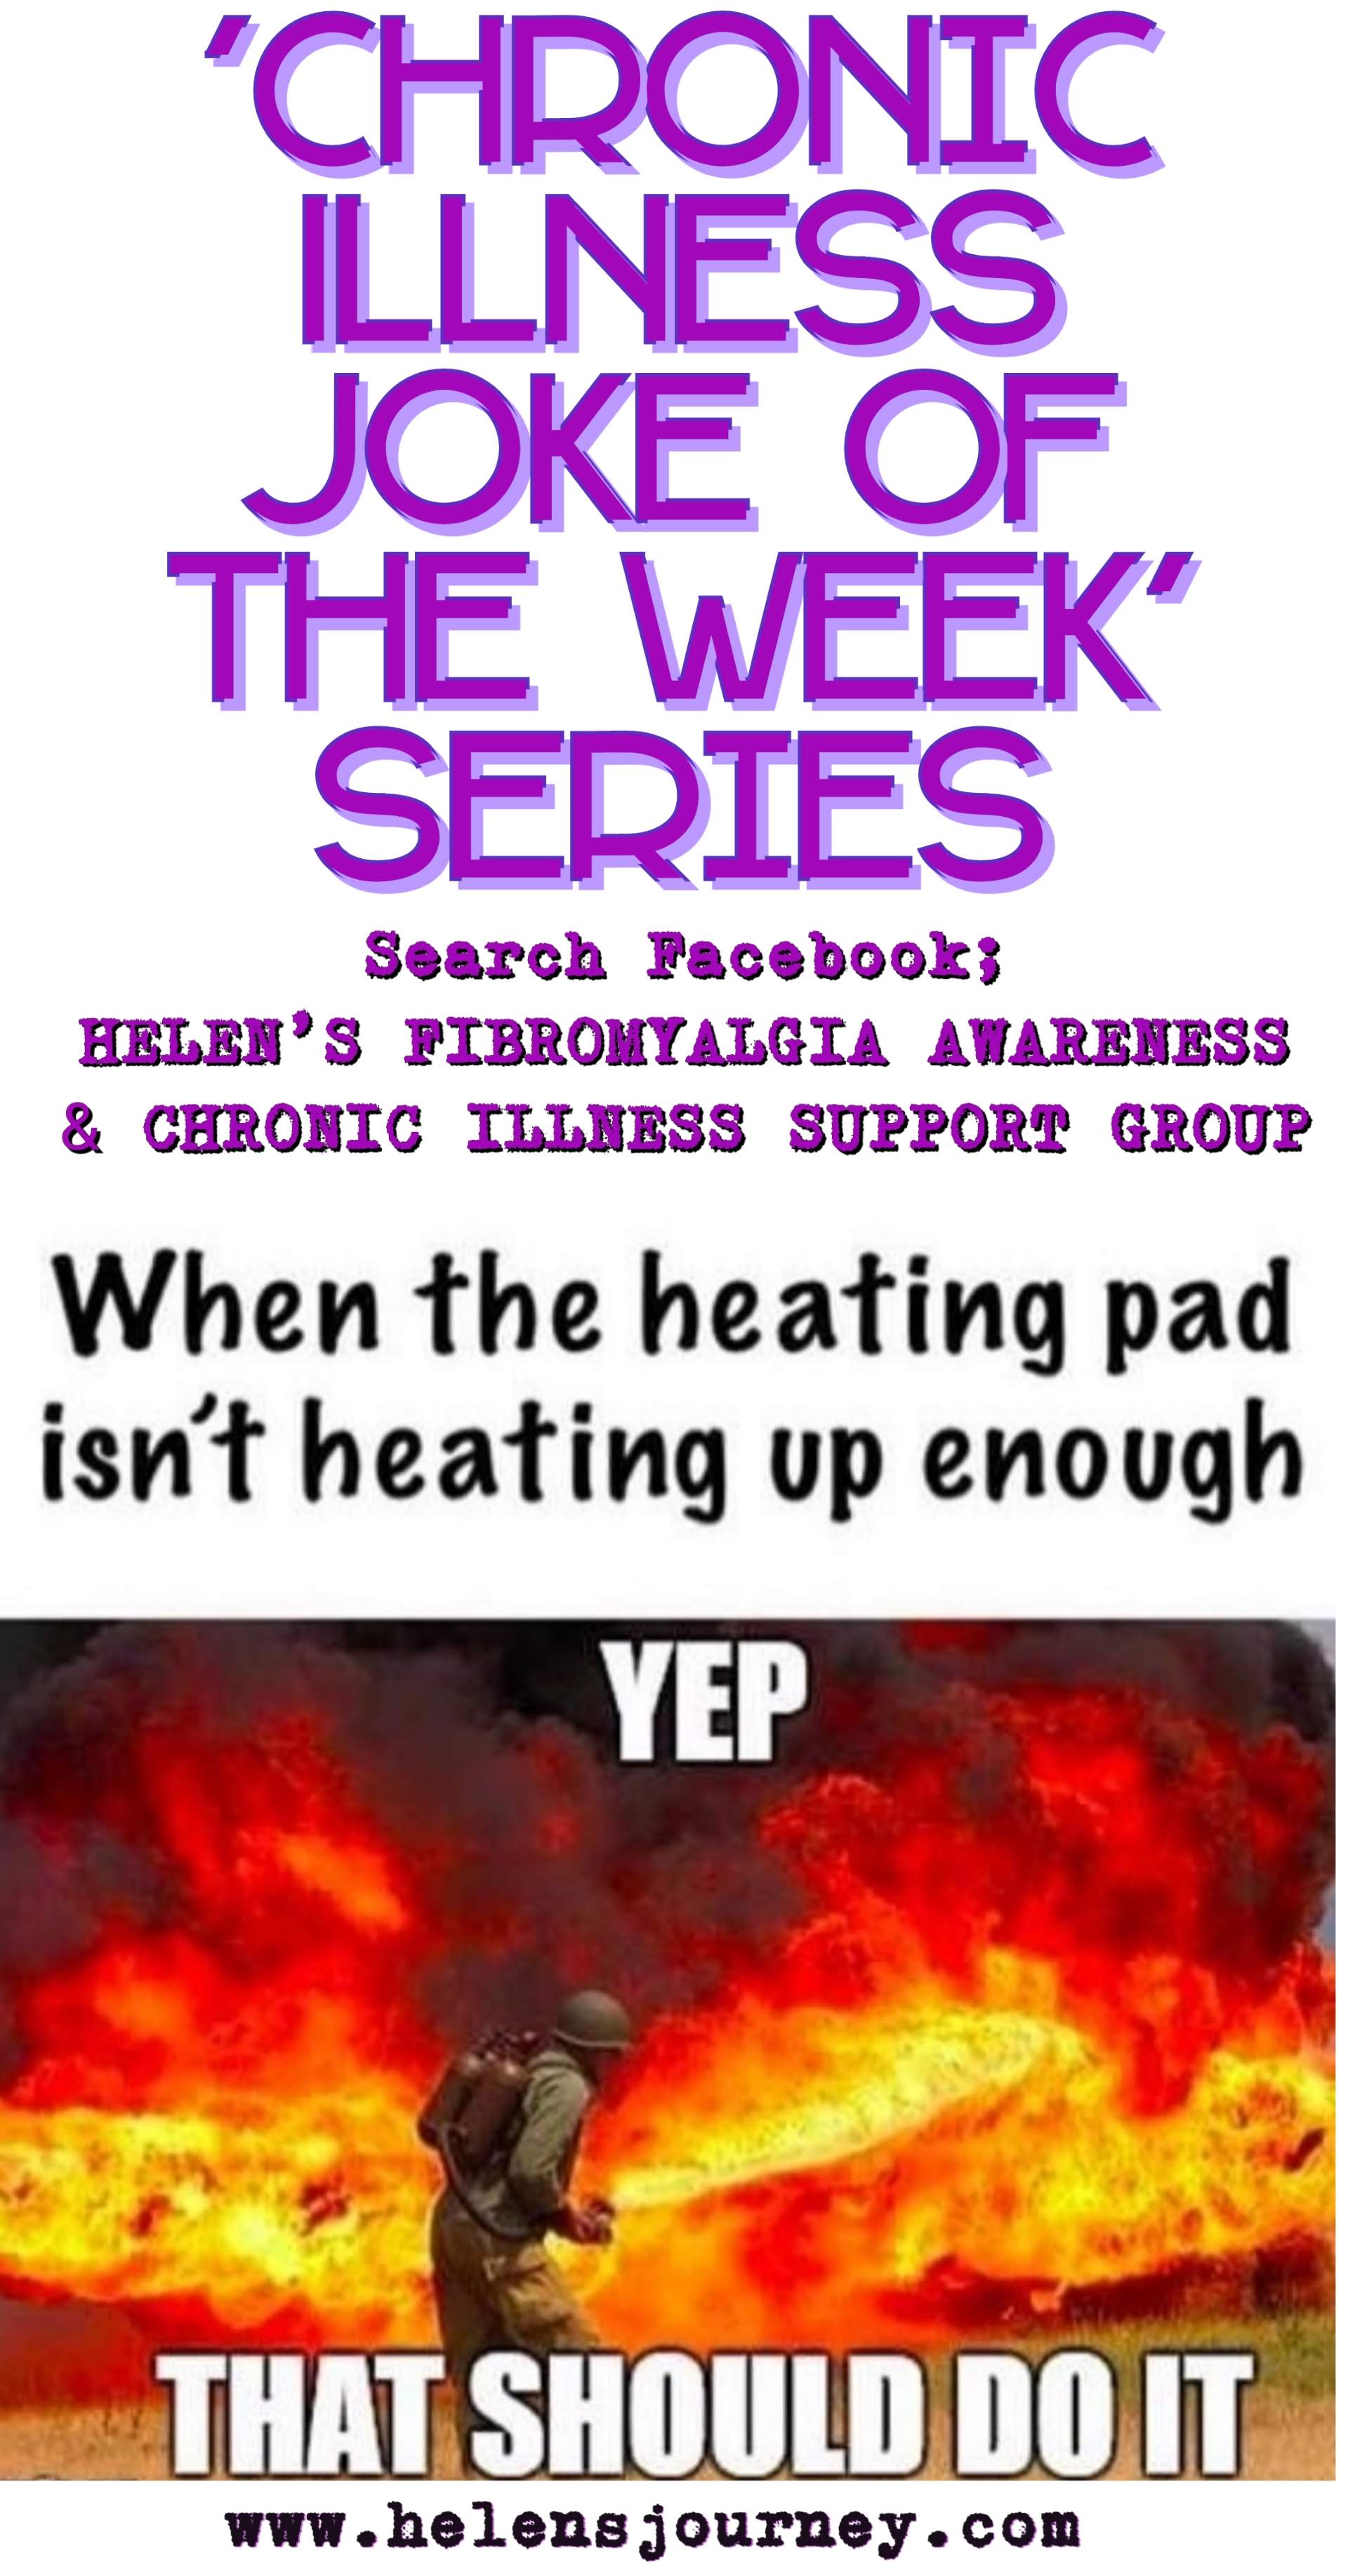 Chronic Illness Joke of the week series, joke about heat therapy using heating pads to help with chronic pain